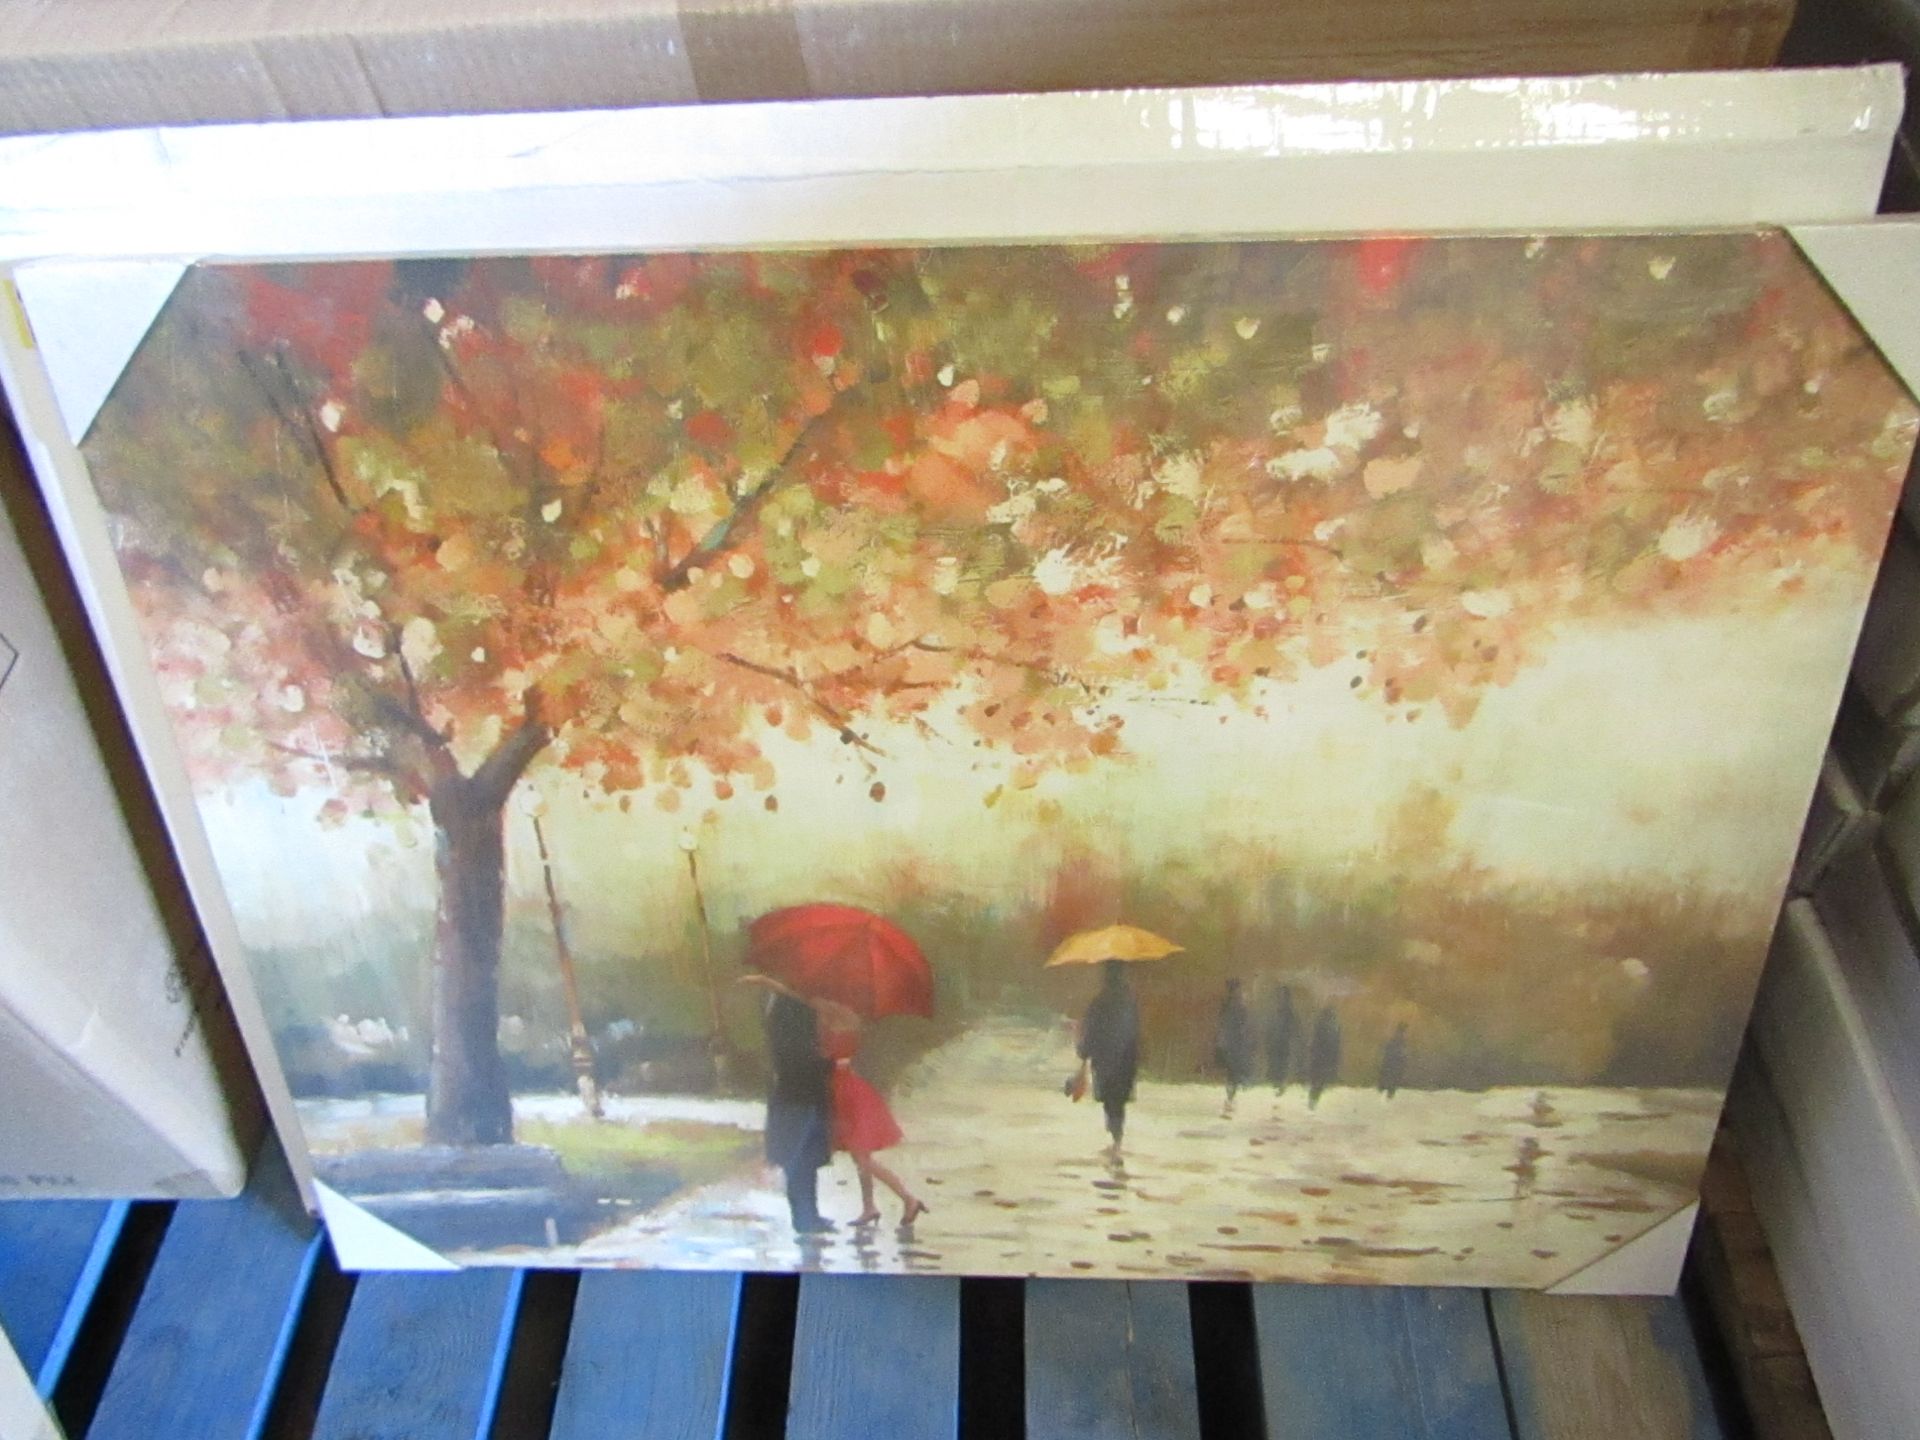 1 x box of 6 "Rainy Days" Canvas Print The Collection by ARGOS size 77cmx 57cm new & packaged